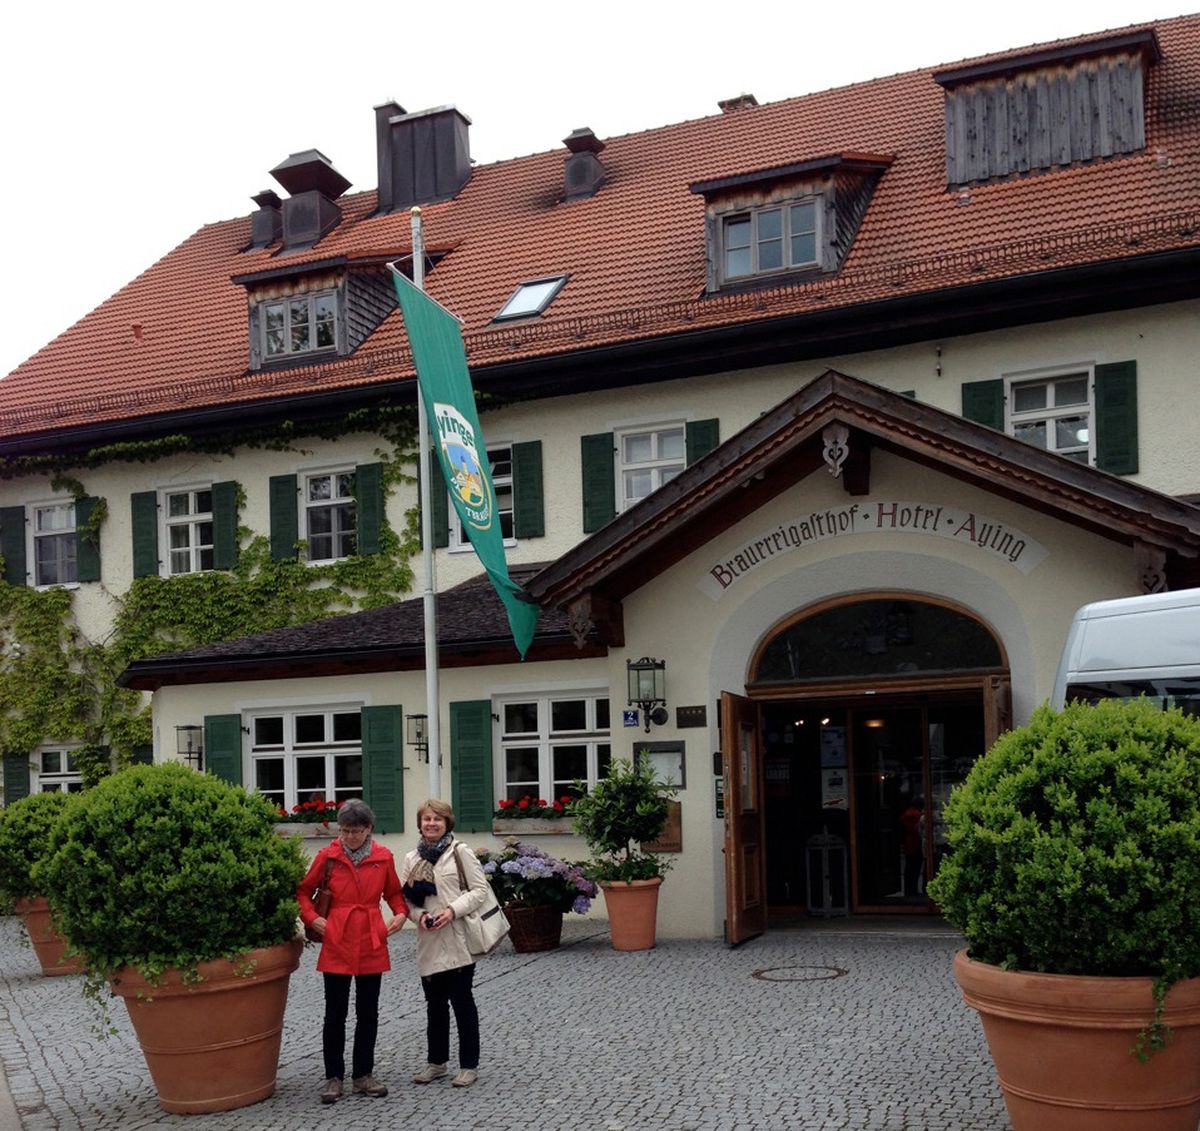 Guests outside the Hotel Aying, a “Brauereigasthof” (brewer’s inn) in the Bavarian village of Aying.